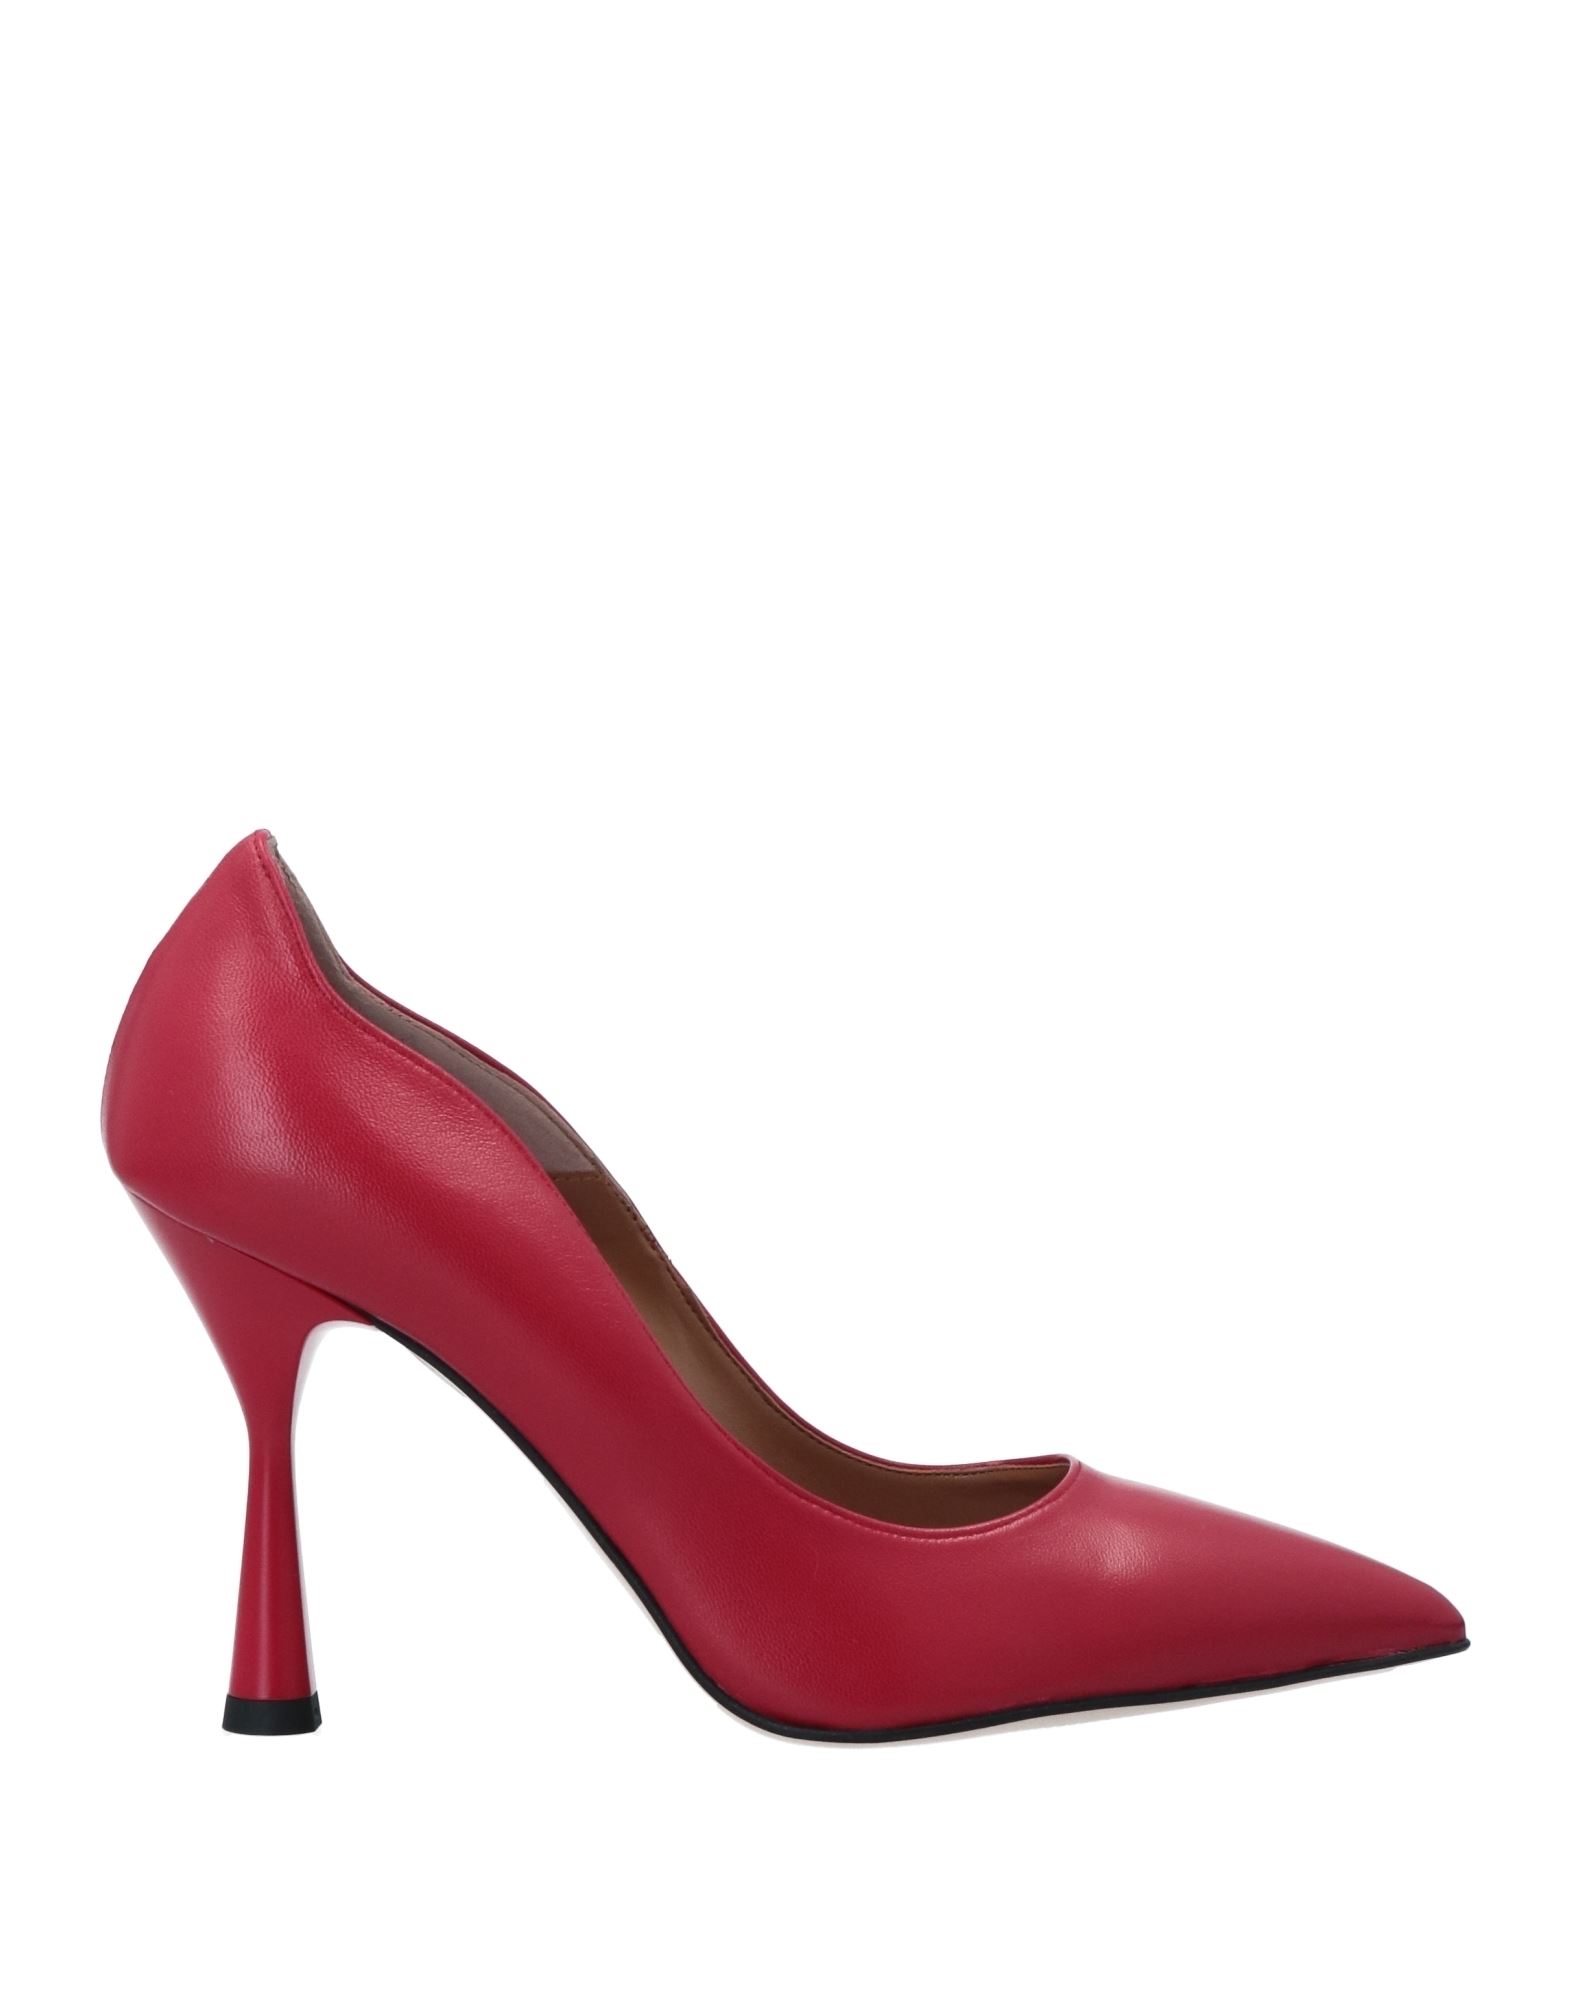 Islo Isabella Lorusso Pumps In Red